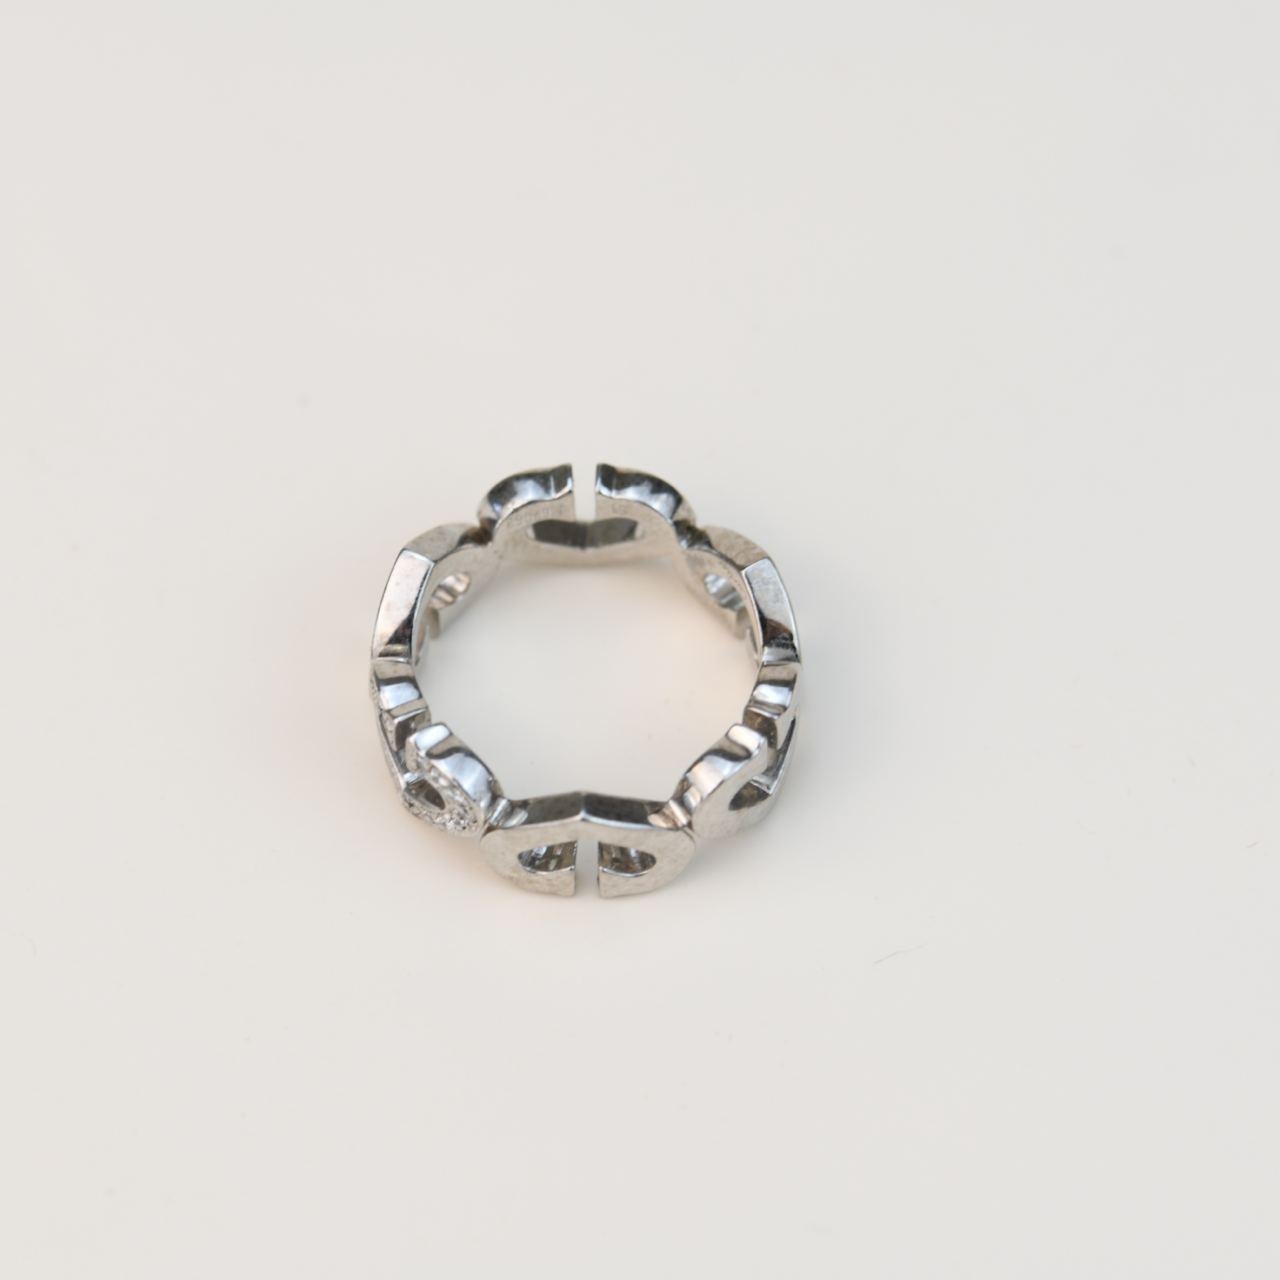 size 51 ring in us